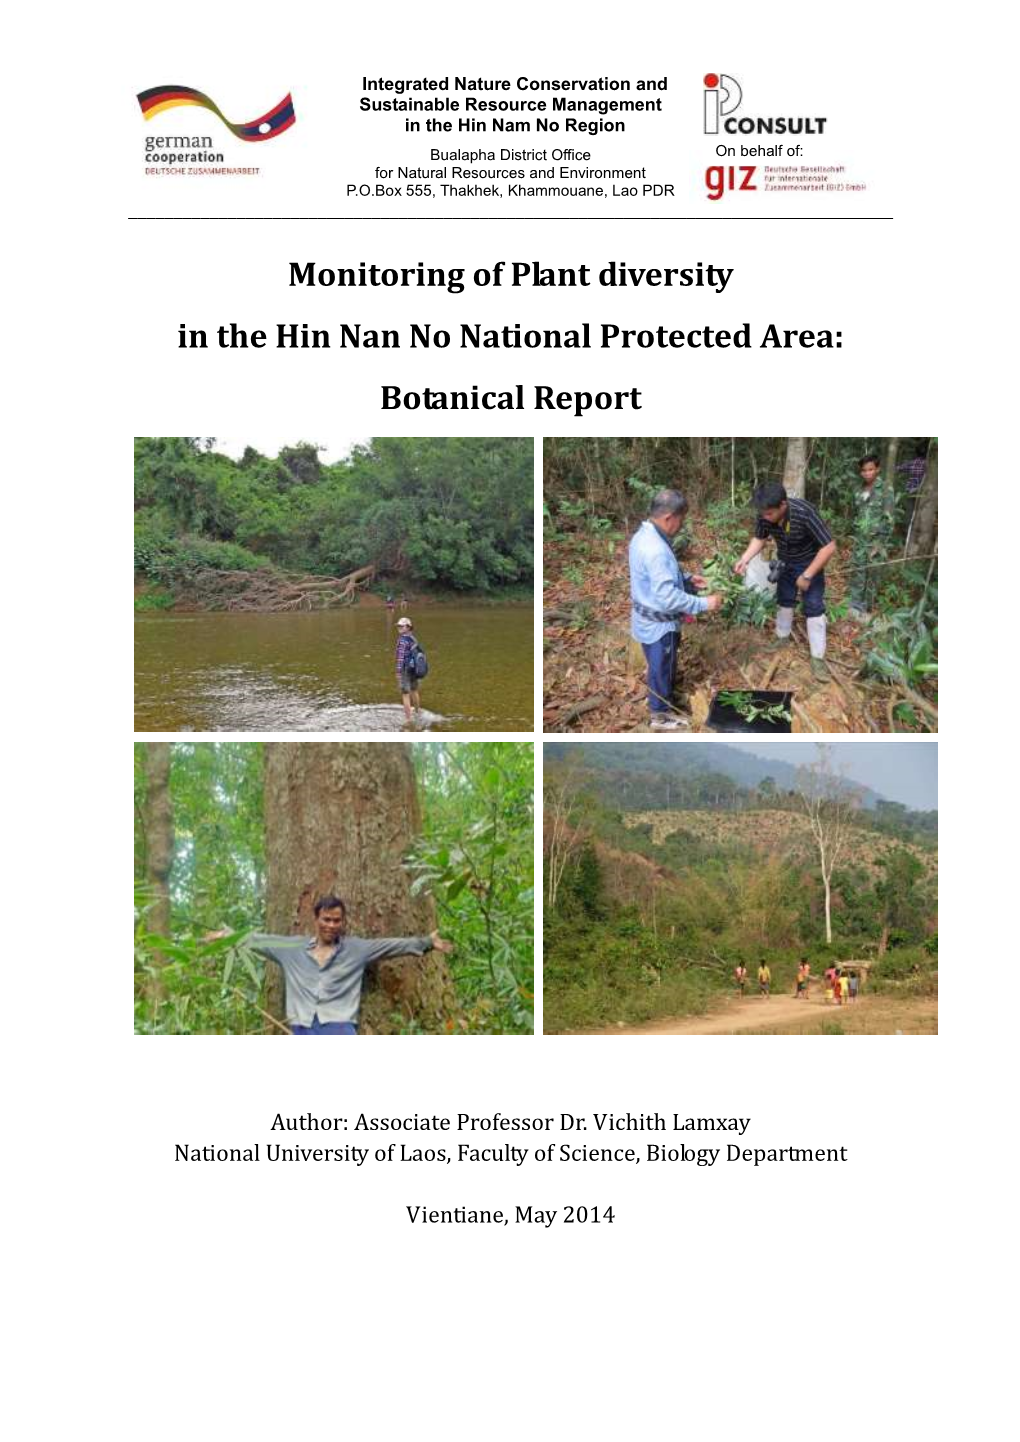 Monitoring of Plant Diversity in the Hin Nan No National Protected Area: Botanical Report